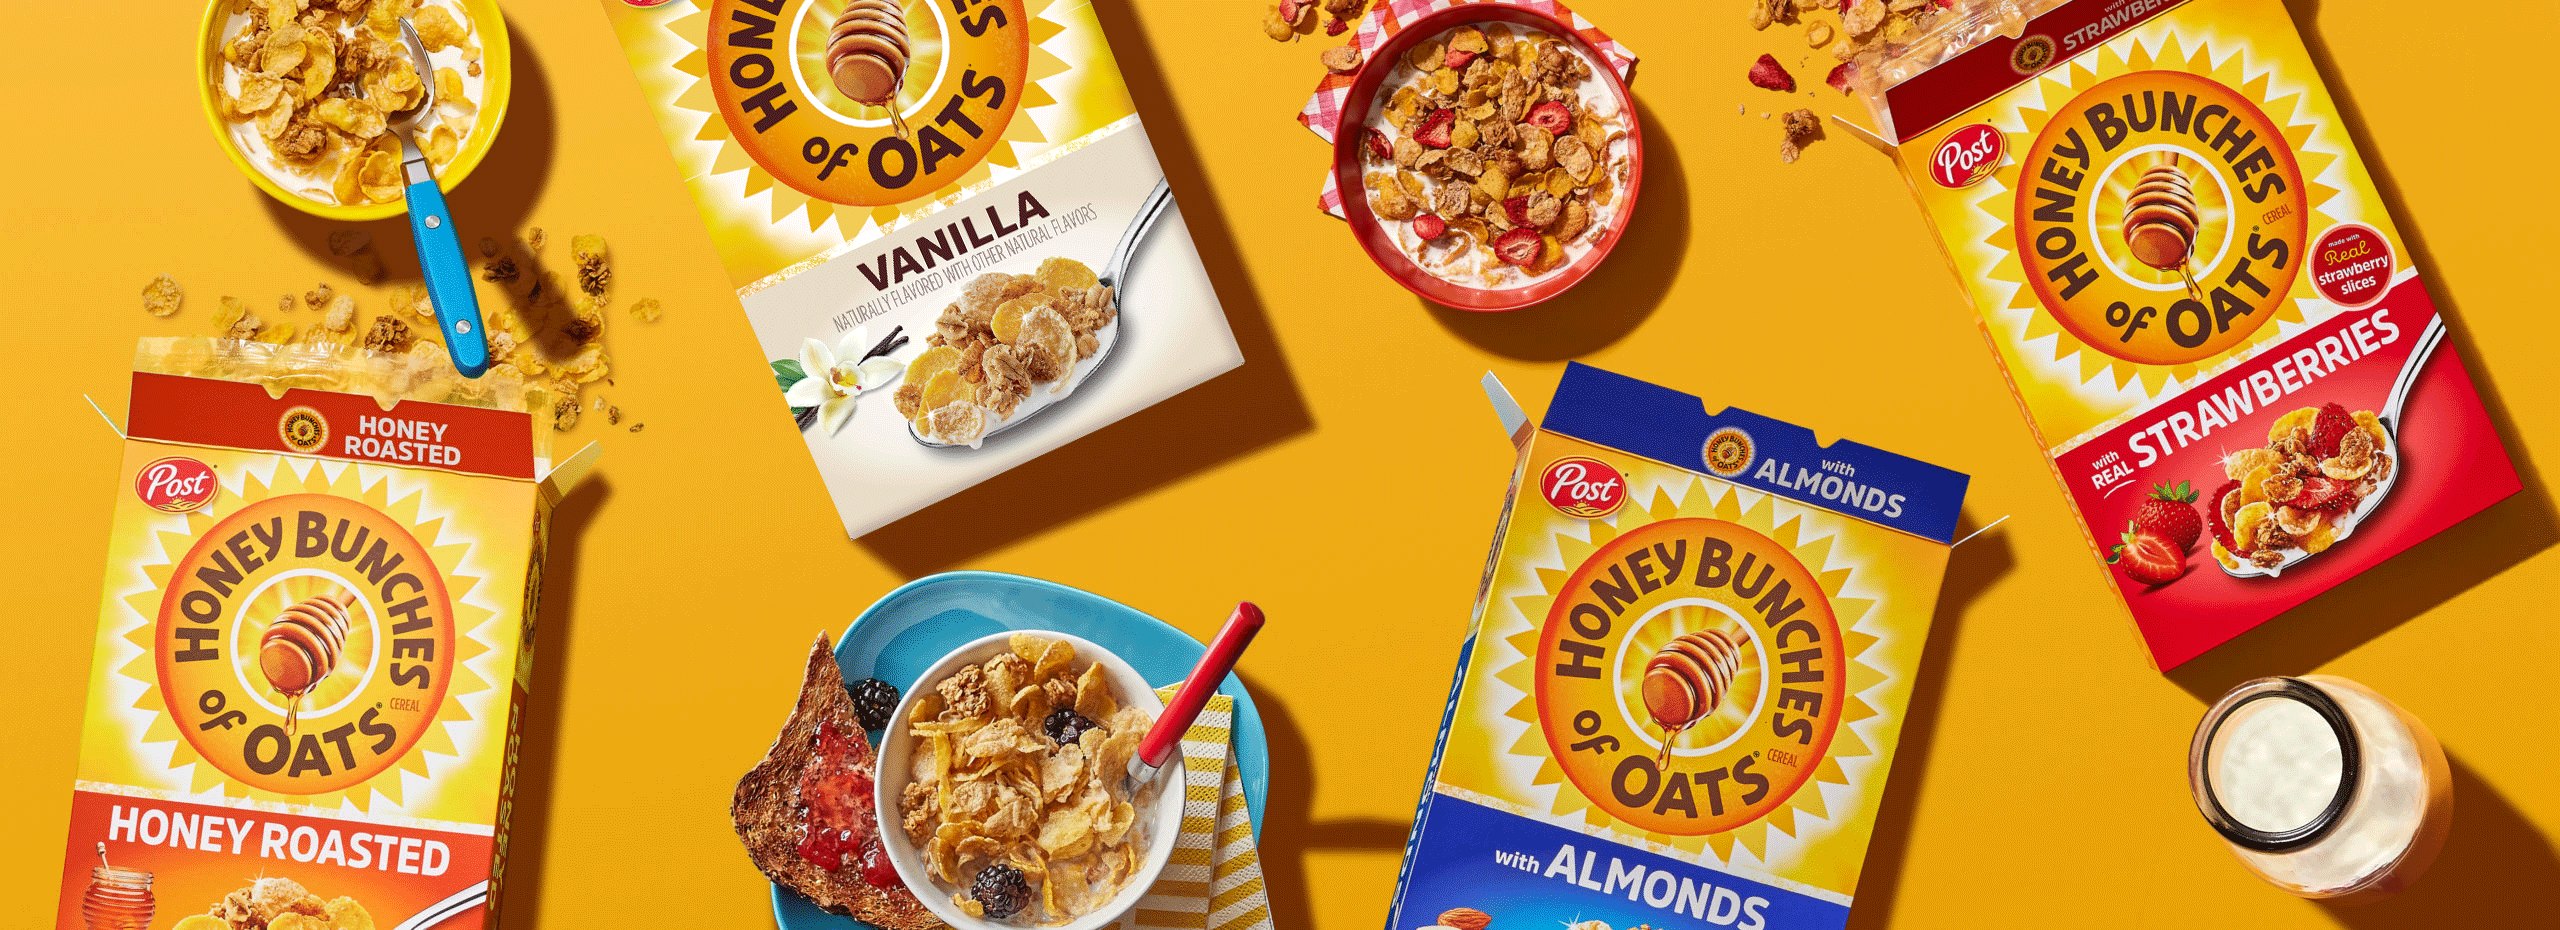 Honey Bunches of Oats cereal boxes